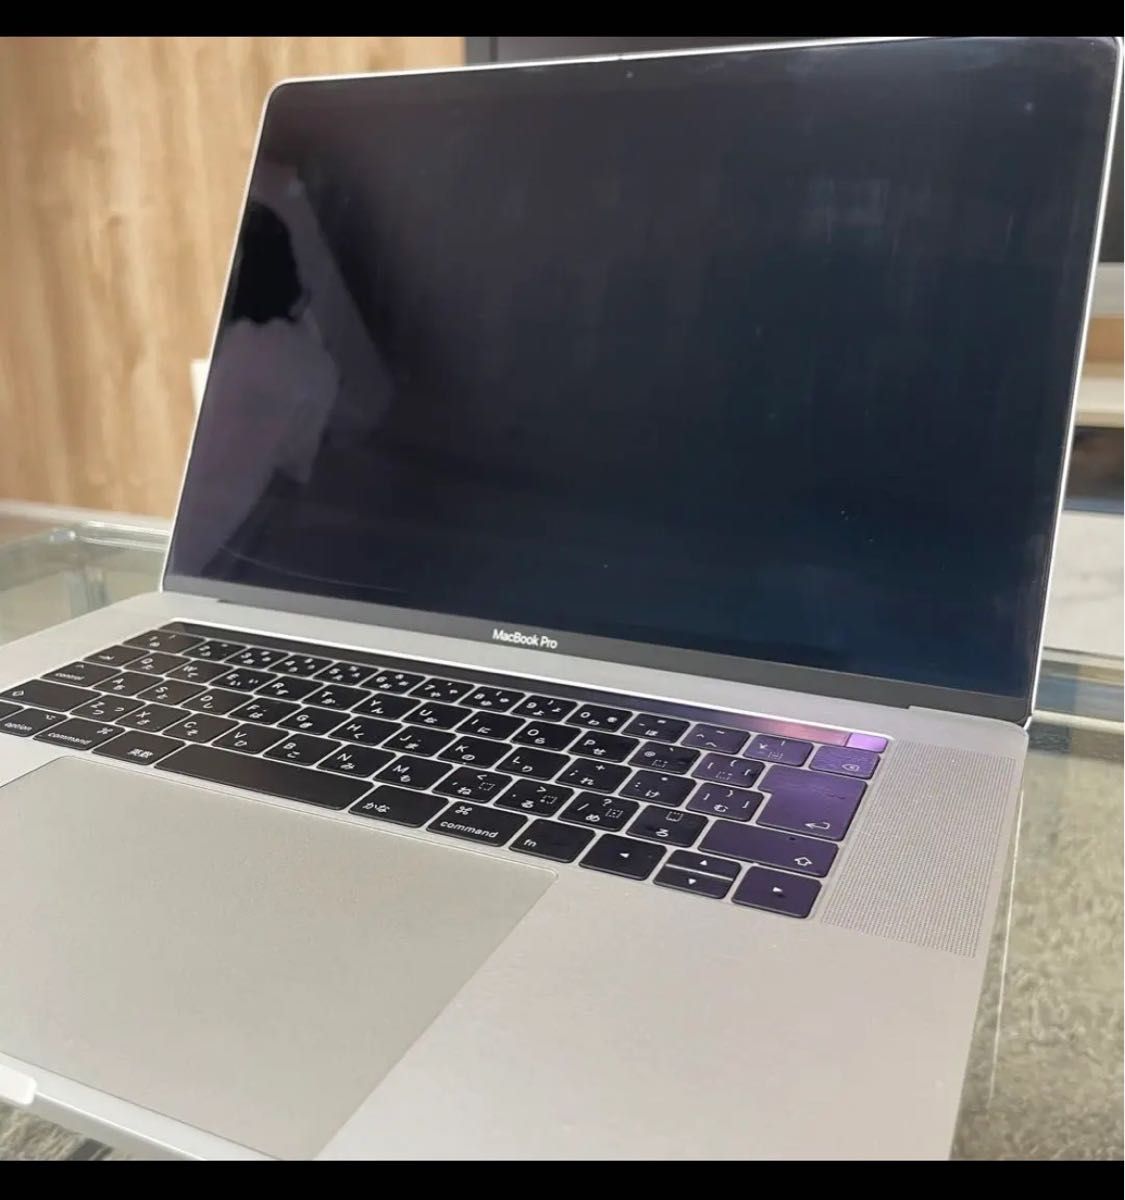 MacBook Pro 2018Touch Barモデル　1TB,3.1GHz